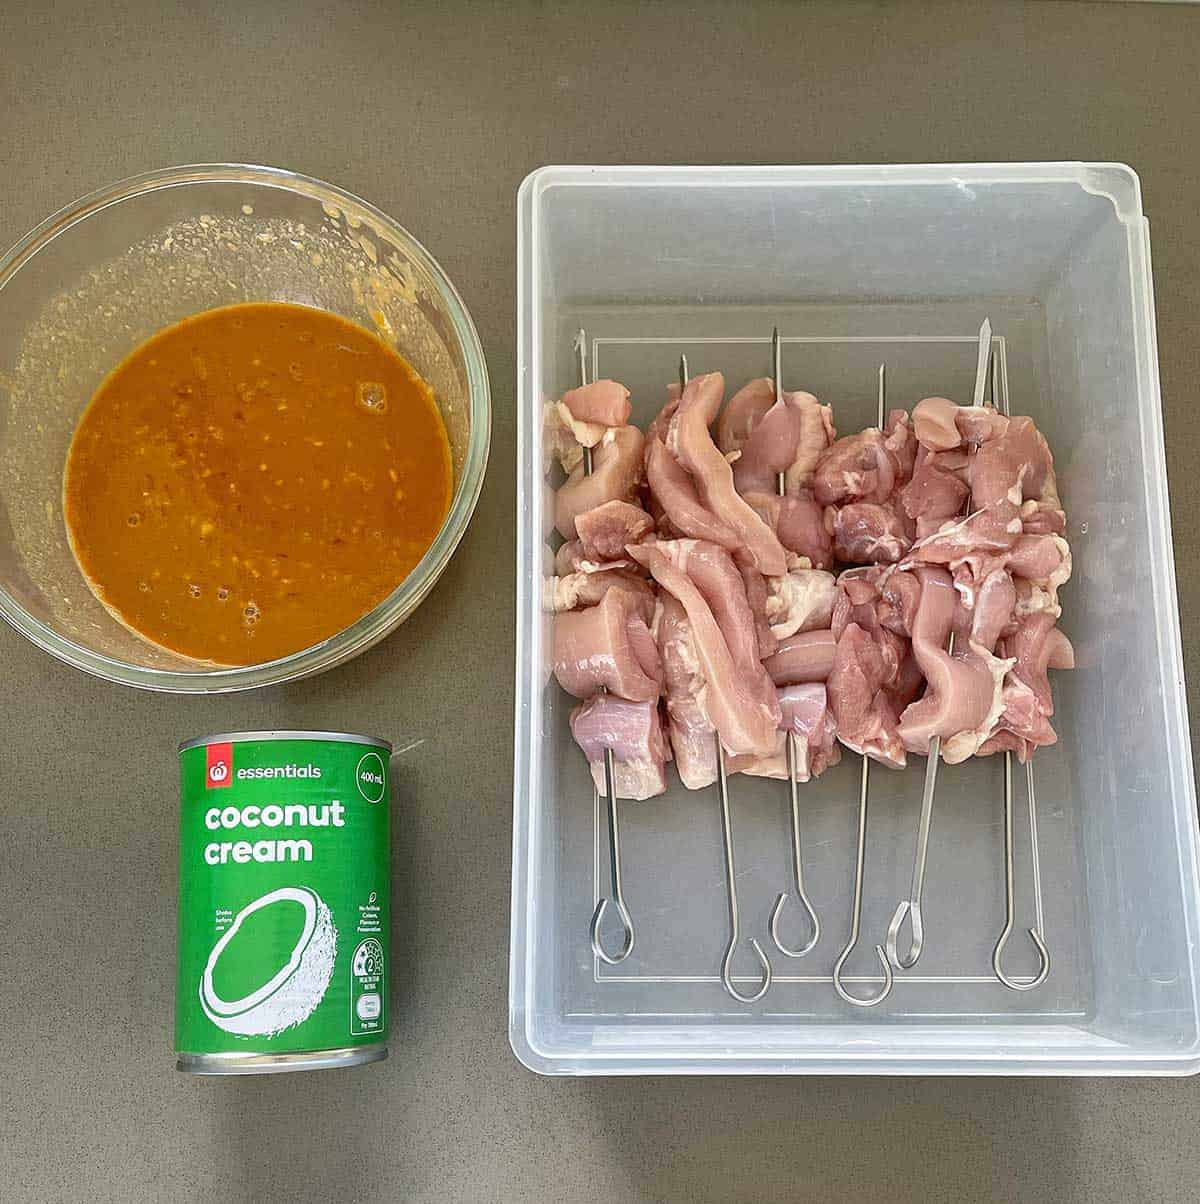 Satay marinade in a glass bowl, a can of coconut milk and a container of raw chicken skewers sitting on a grey bench.